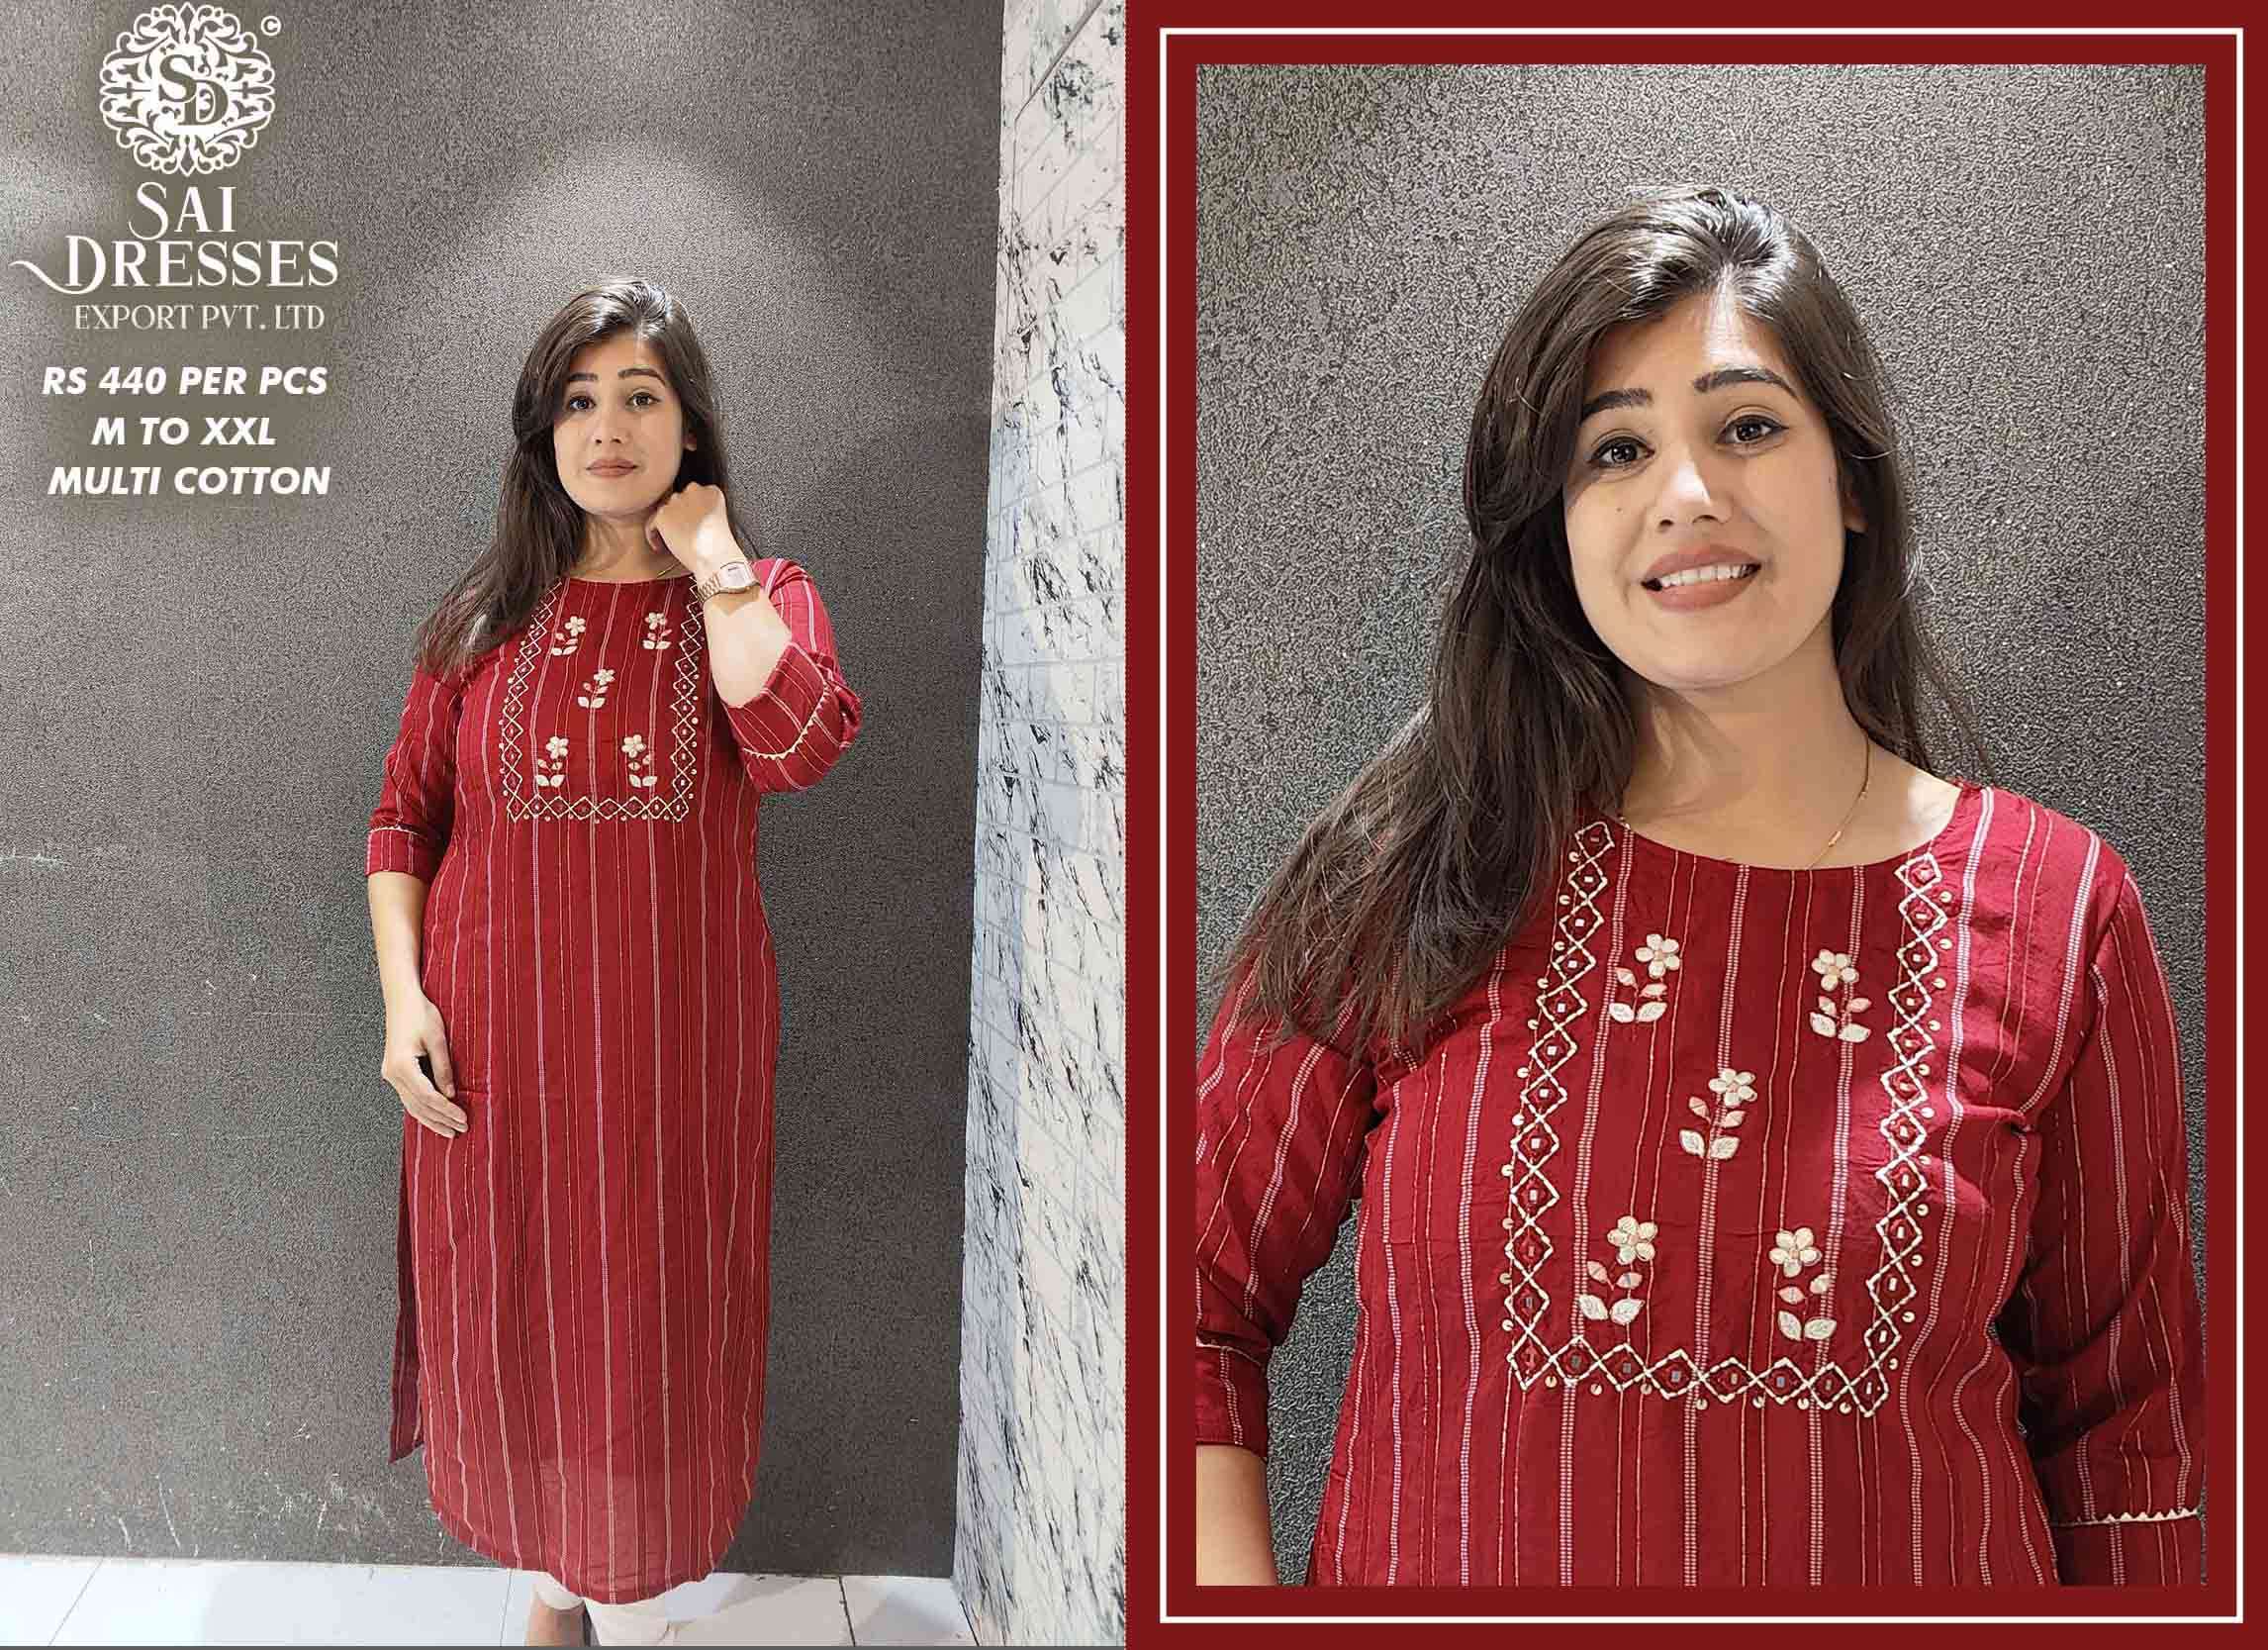 SAI DRESSES PRESENT D.NO SD37 READY TO WEAR EXCLUSIVE HANDWORK KURTI COMBO COLLECTION IN WHOLESALE RATE IN SURAT